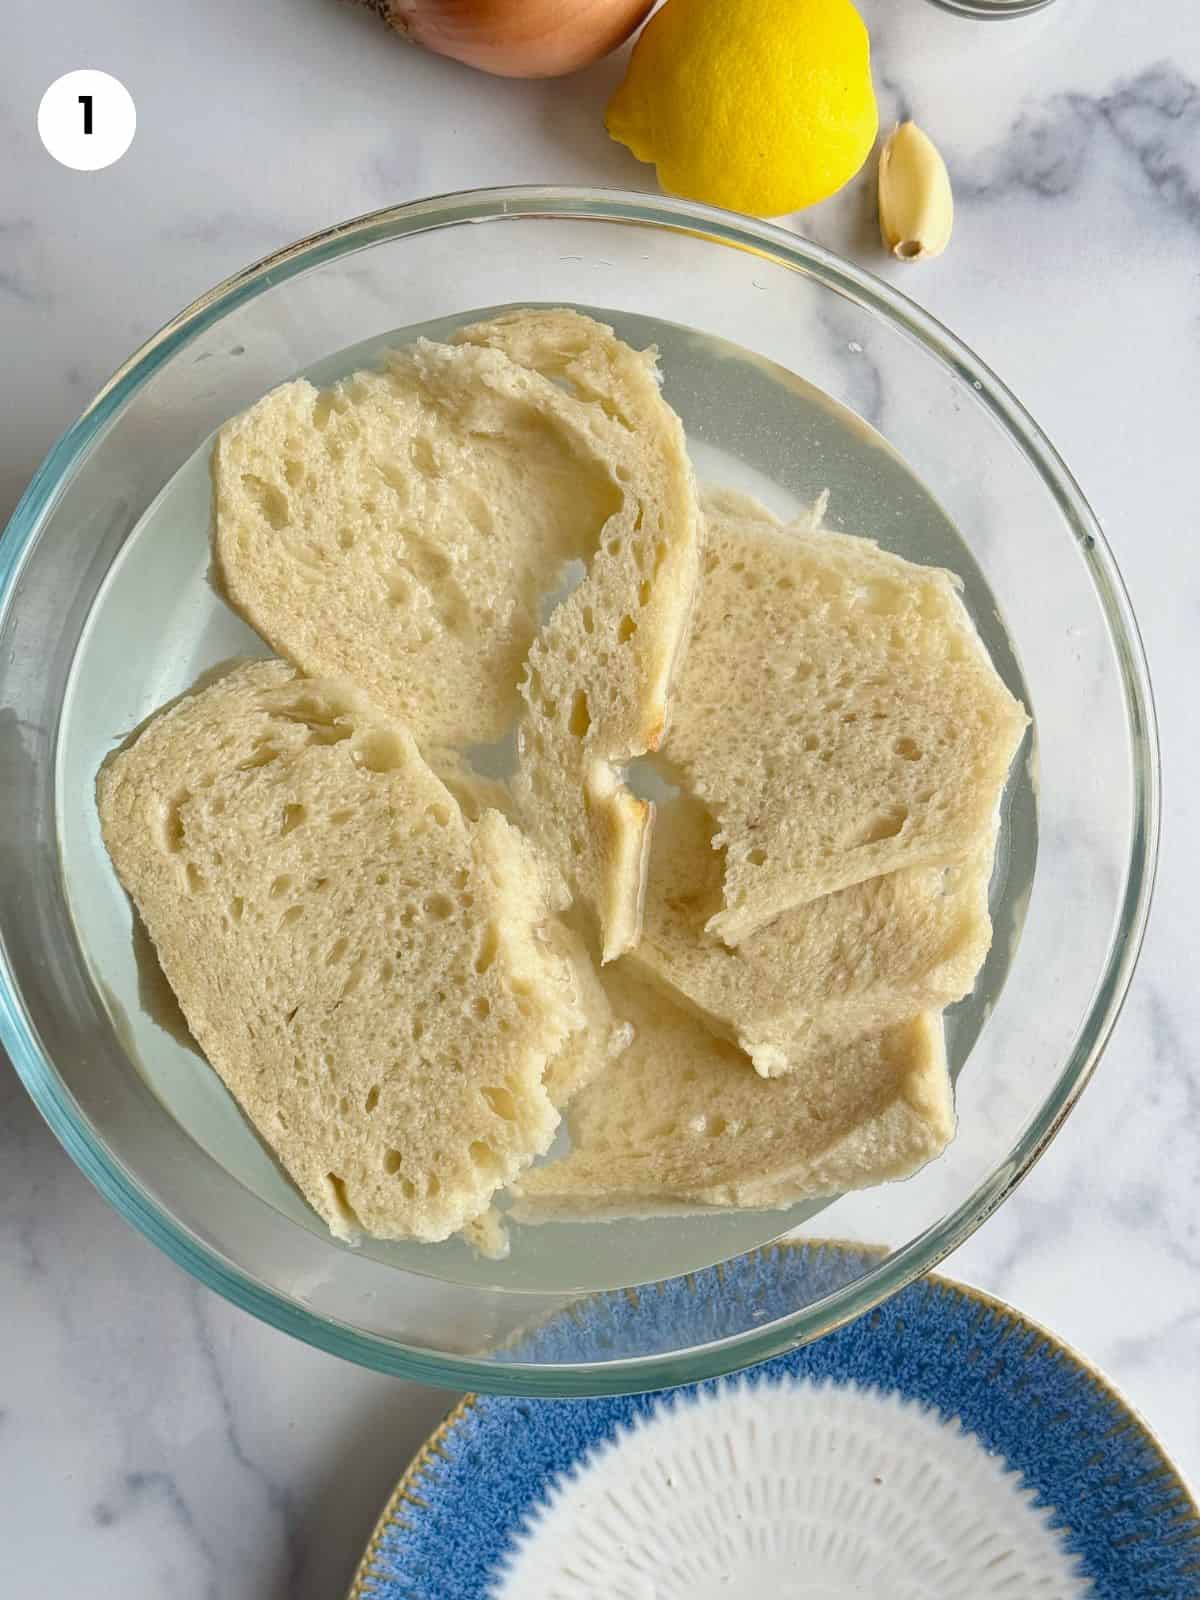 Soaking bread in a bowl filled with water.